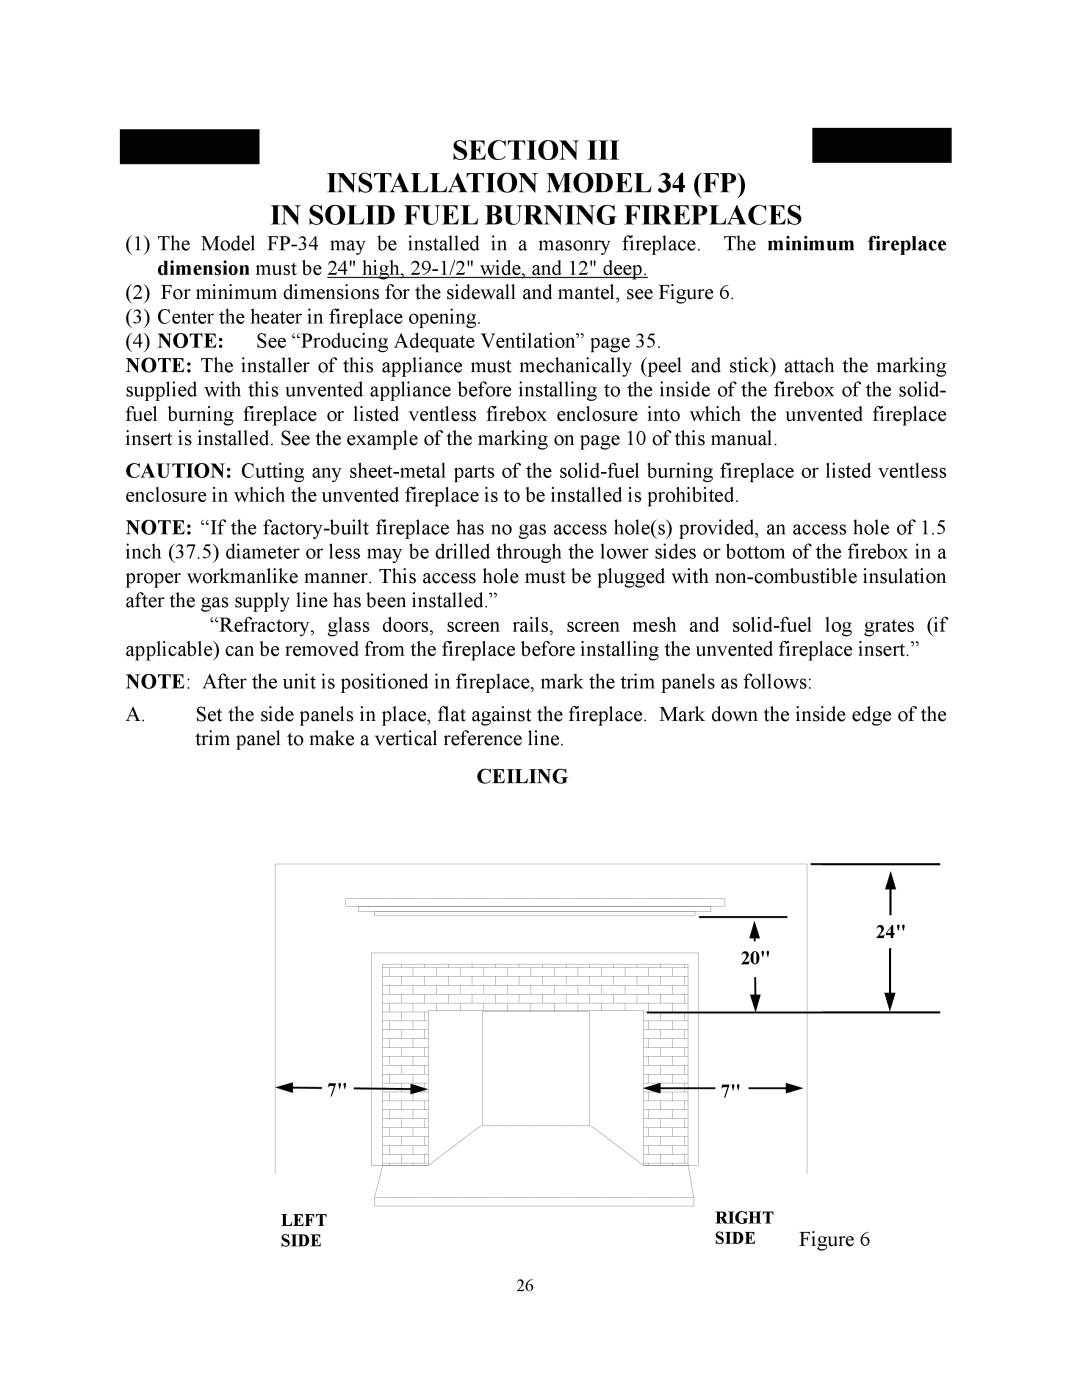 New Buck Corporation manual SECTION INSTALLATION MODEL 34 FP, In Solid Fuel Burning Fireplaces, Ceiling, Figure 